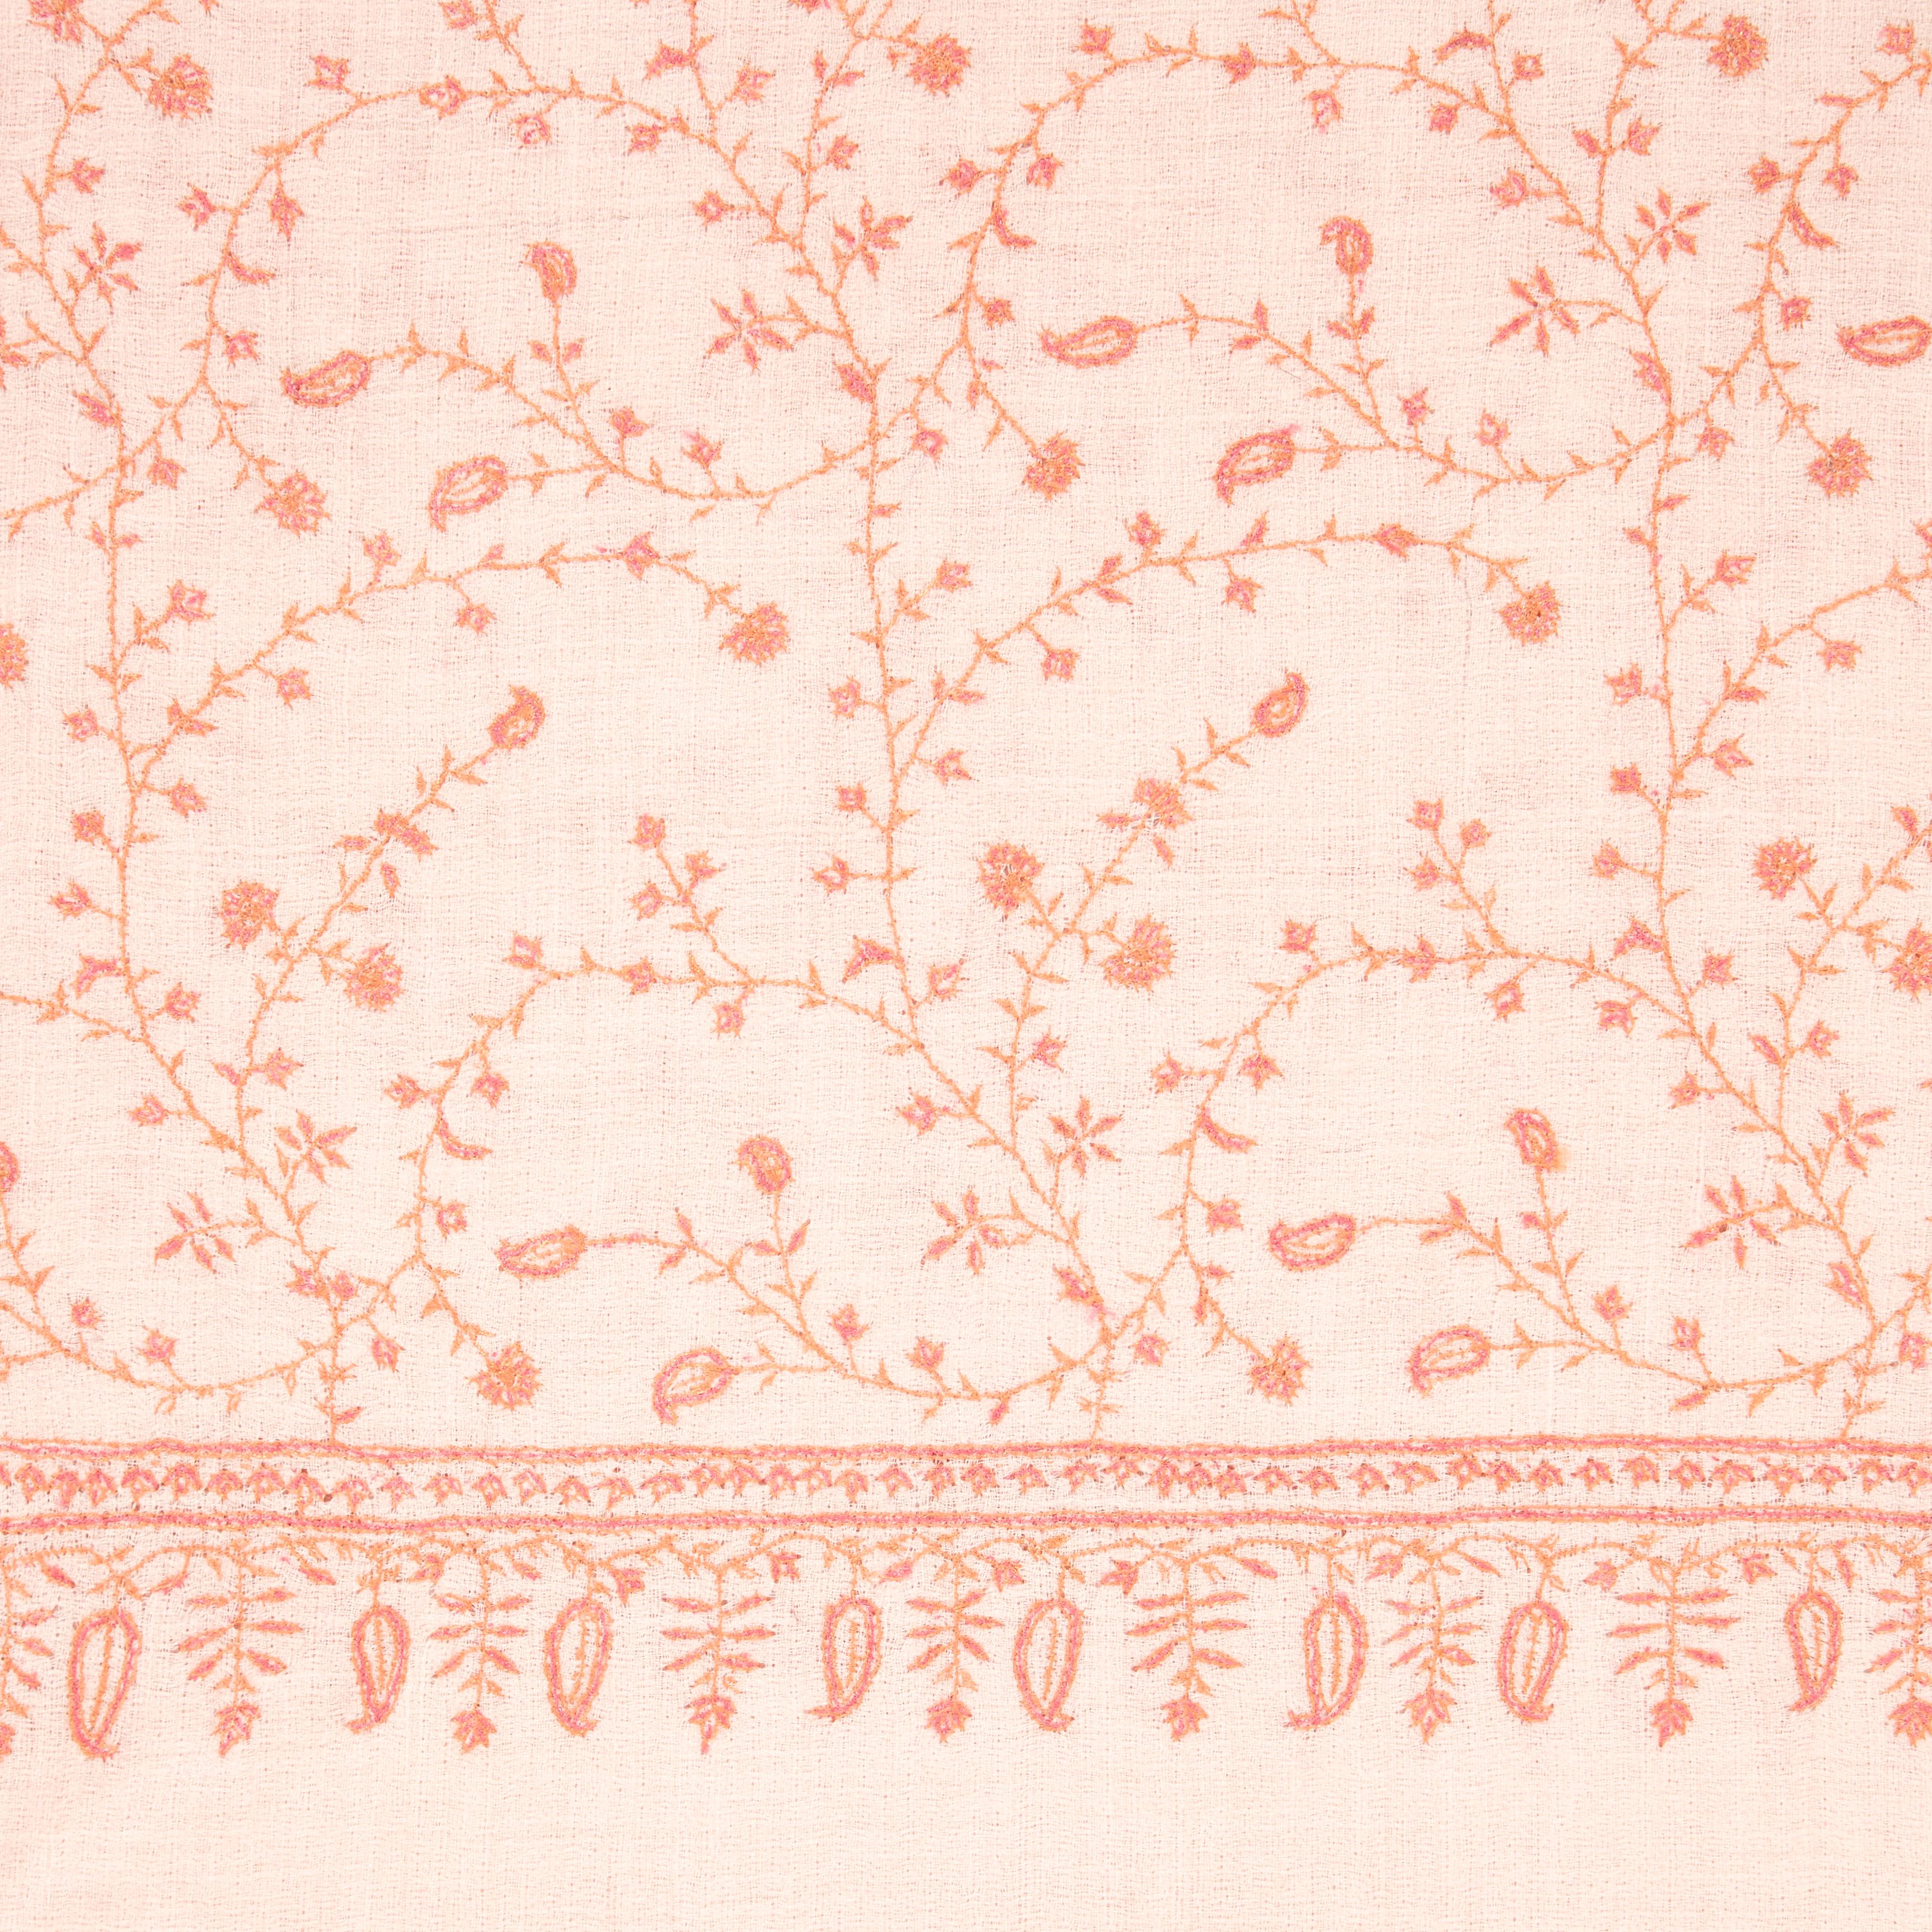 Orange Limited Edition Hand Embroidered Pale Pink 100% Cashmere Shawl - Brand New 